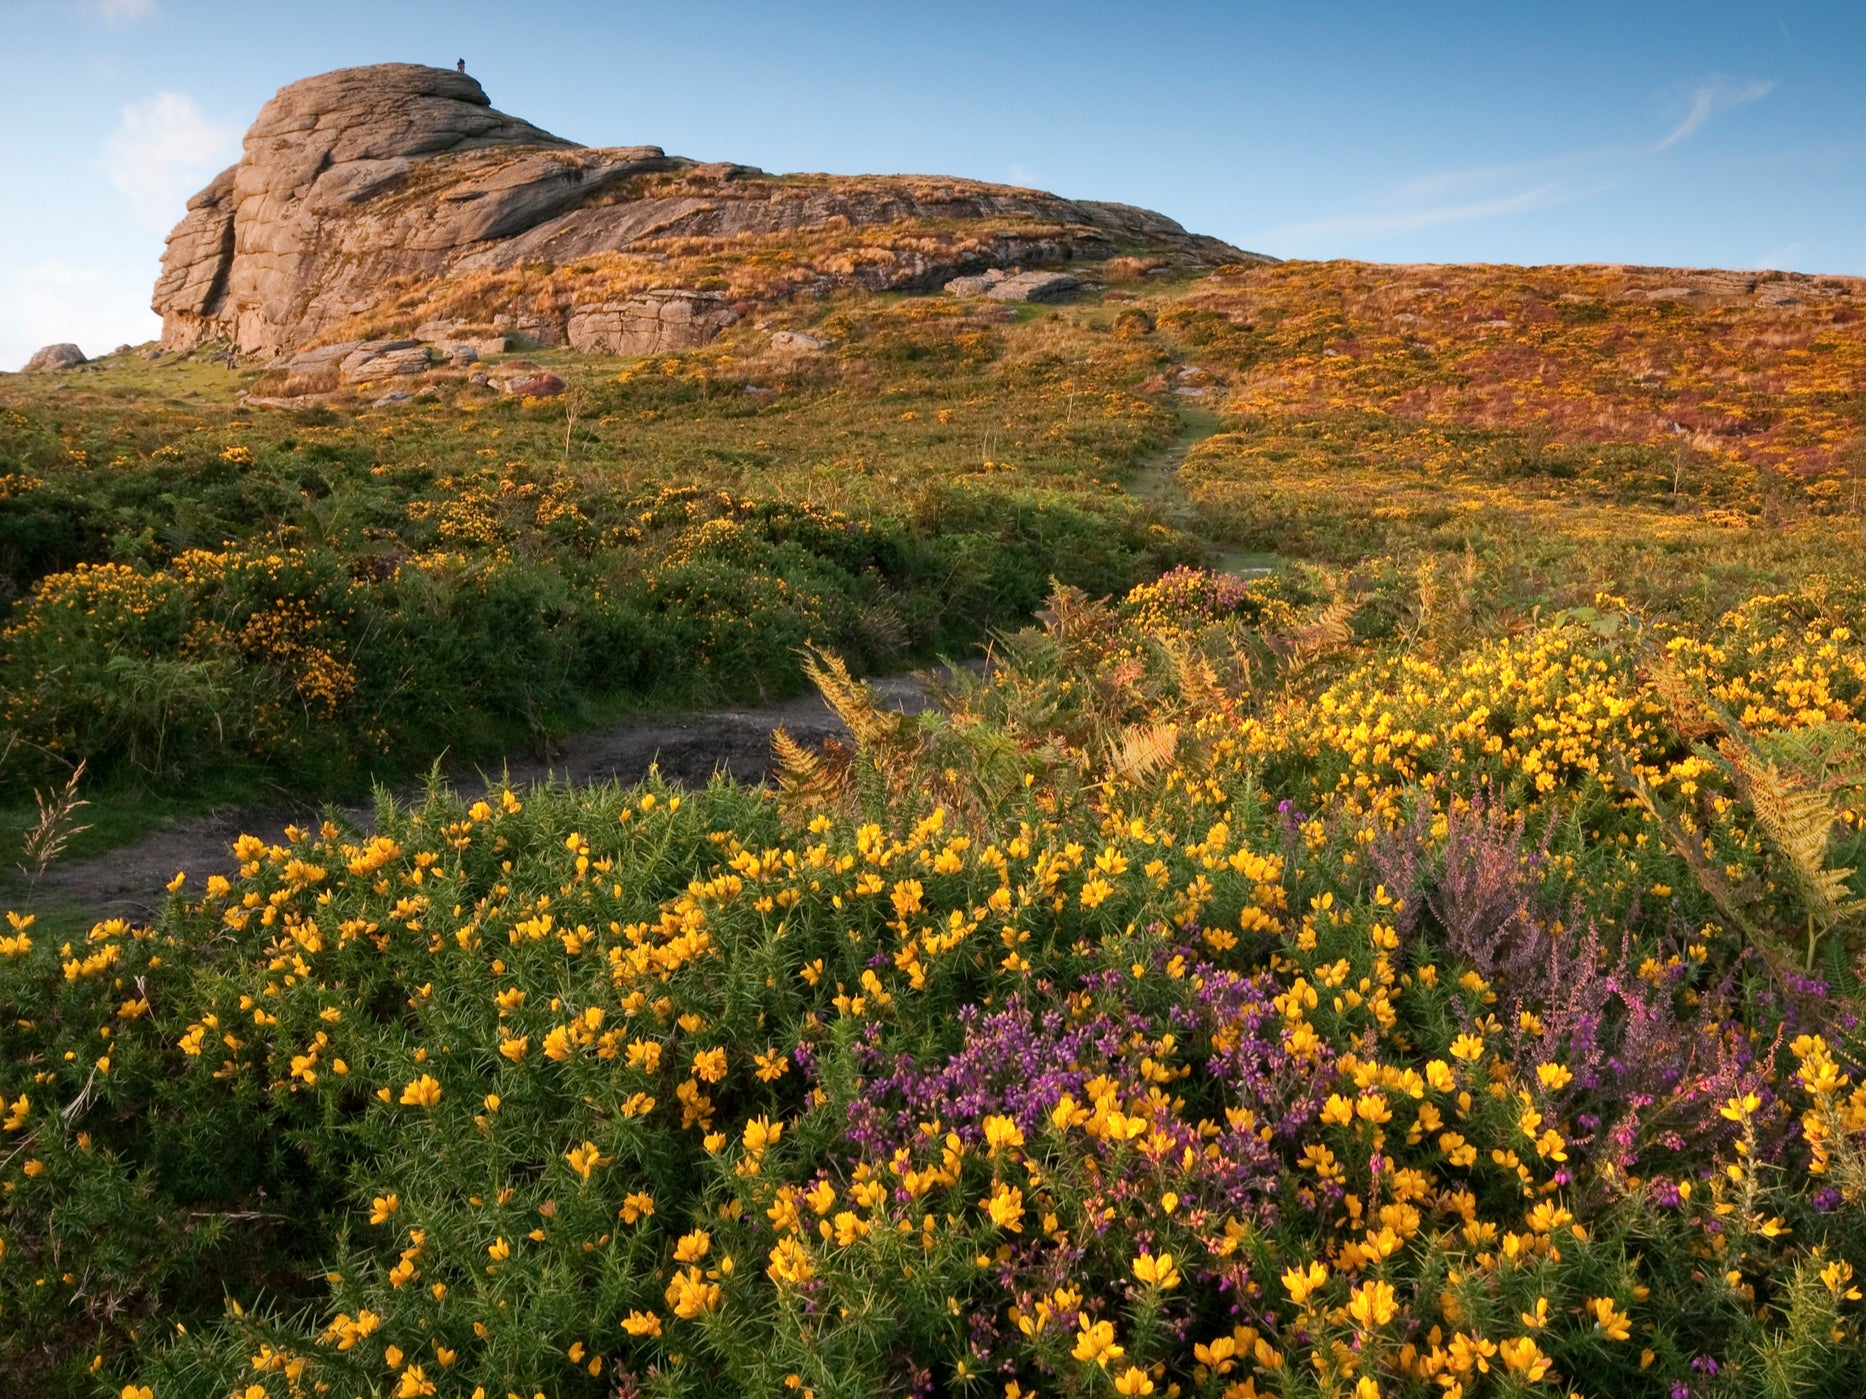 Haytor on Dartmoor, owned by the Duchy of Cornwall. Centuries of human activity have left only tiny pockets of intact wilderness